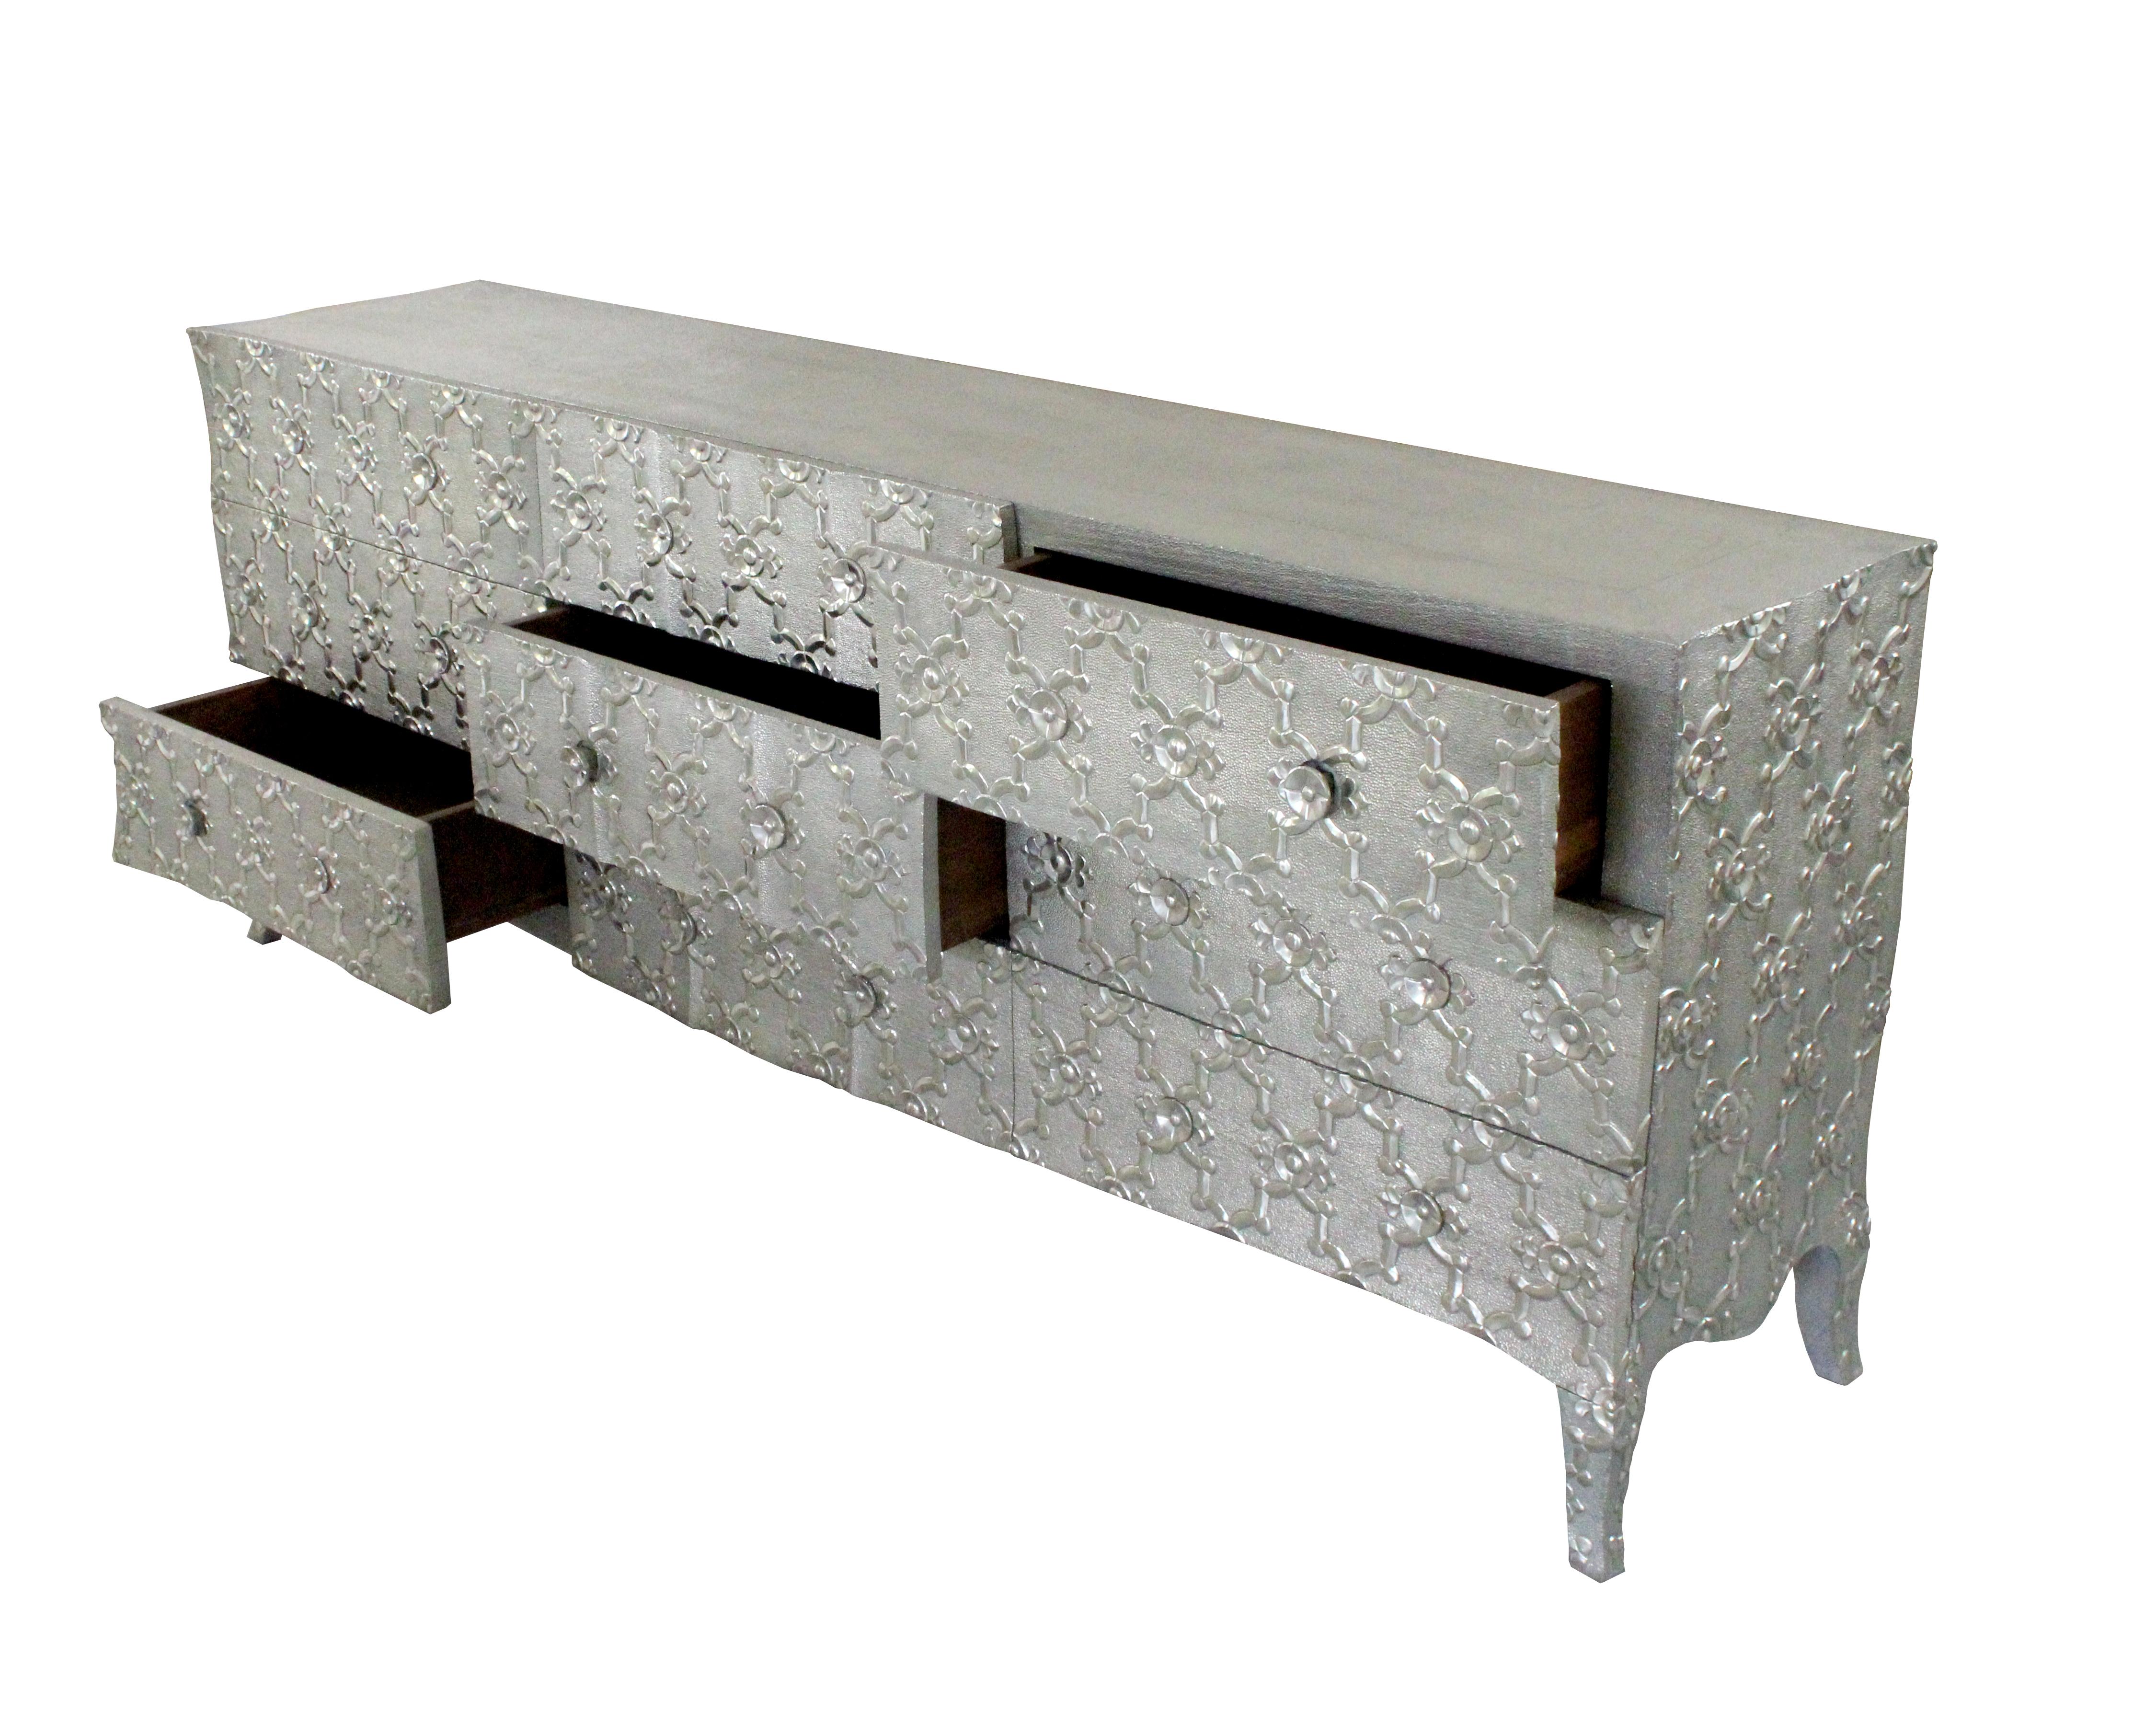 Mid Century Modern Dresser or Mid Century Modern Credenza Louis XVI Fleur De Lis in white bronze clad by renowned designer Paul Mathieu. This large Mid Century Modern Dresser or Mid Century Modern Credenza has got nine drawers with his